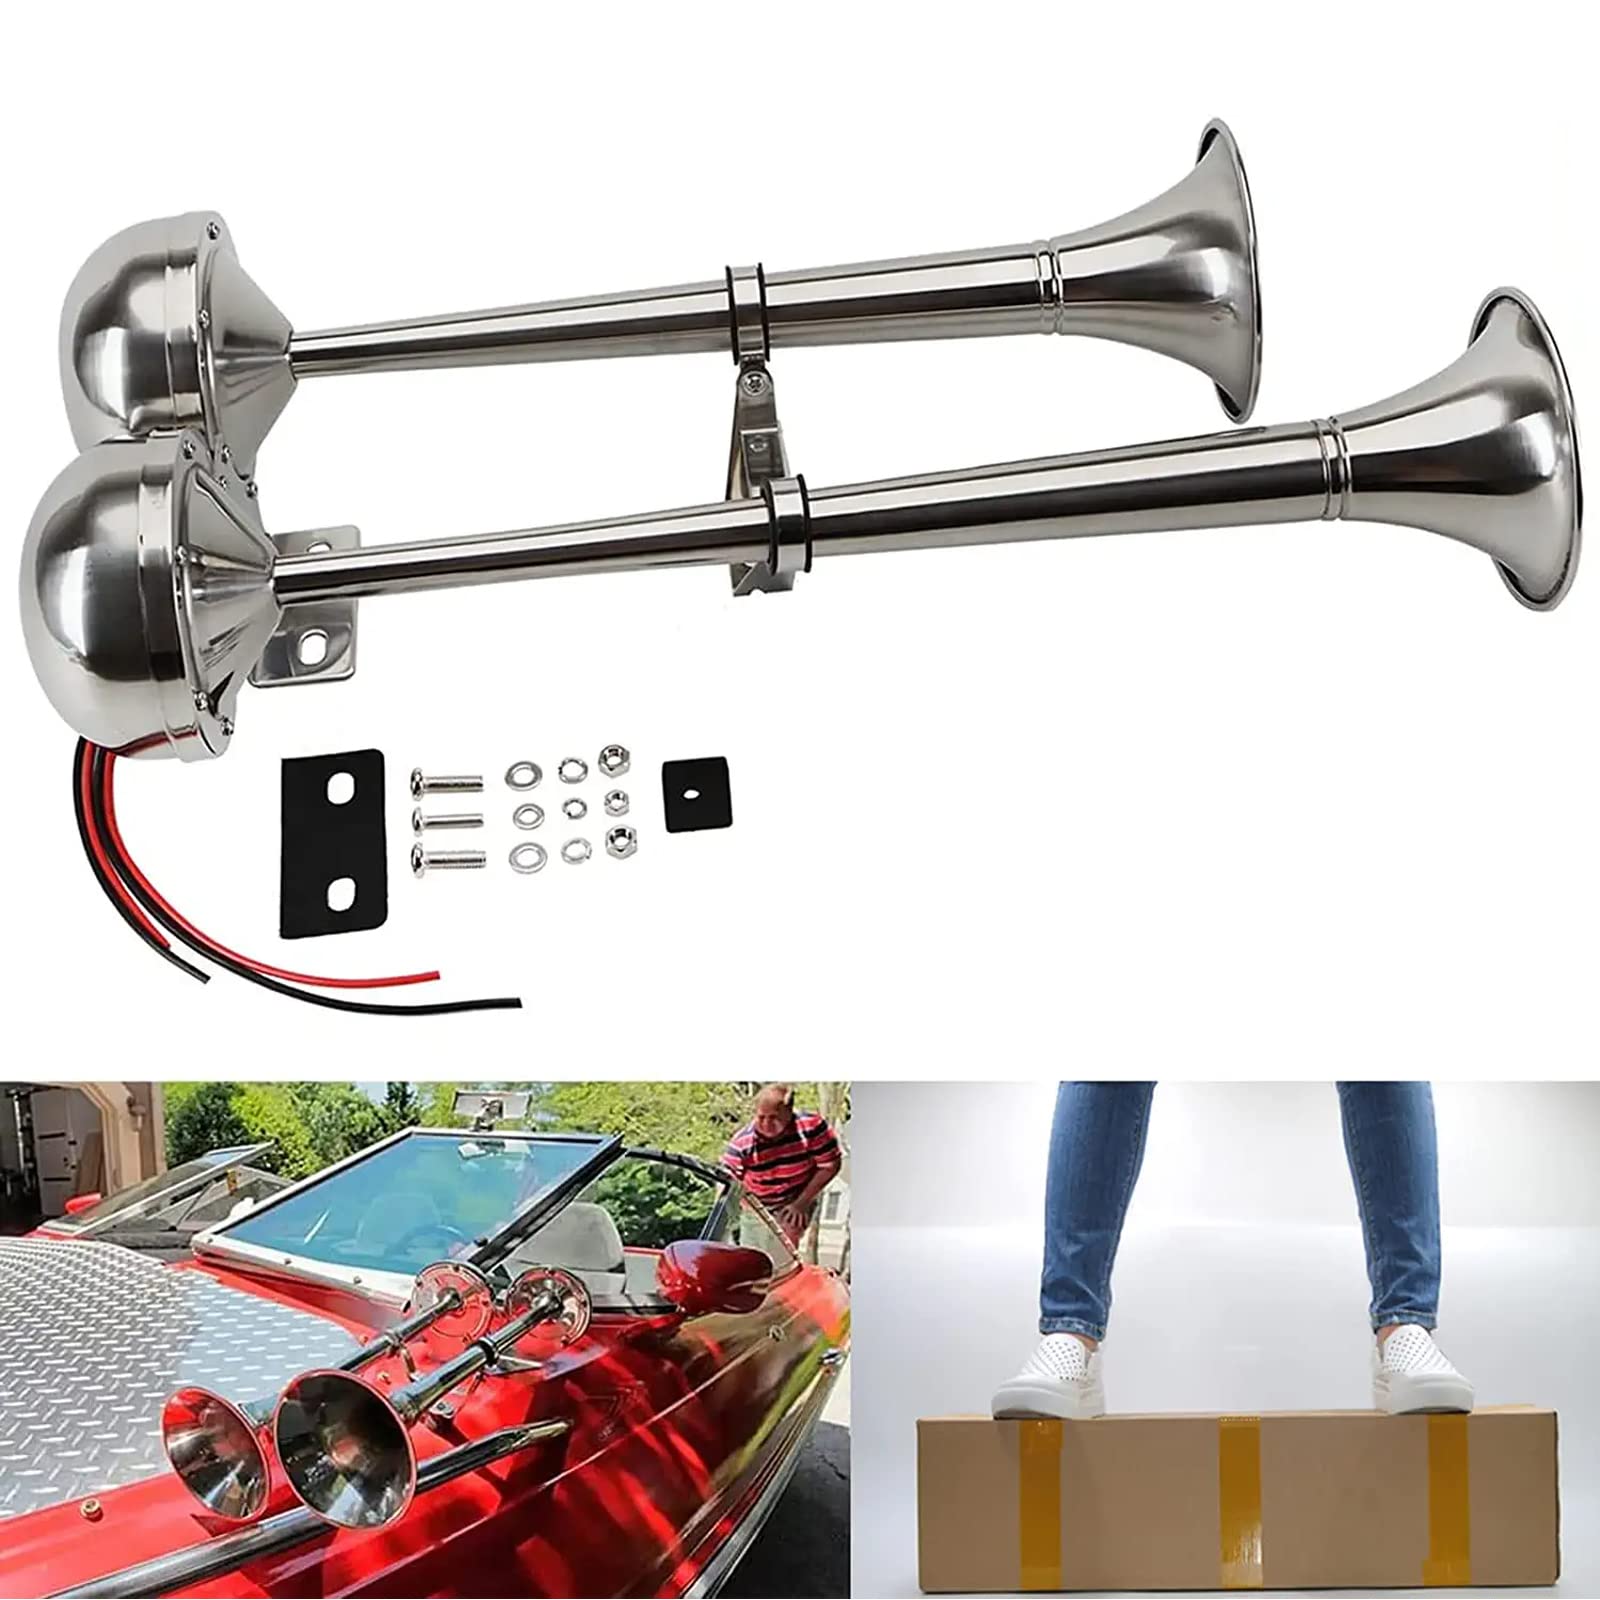 Boat Horns 12V, Marine Boat Trumpet Horn Polished Stainless Steel Marine  Horn, BANHAO Low and High